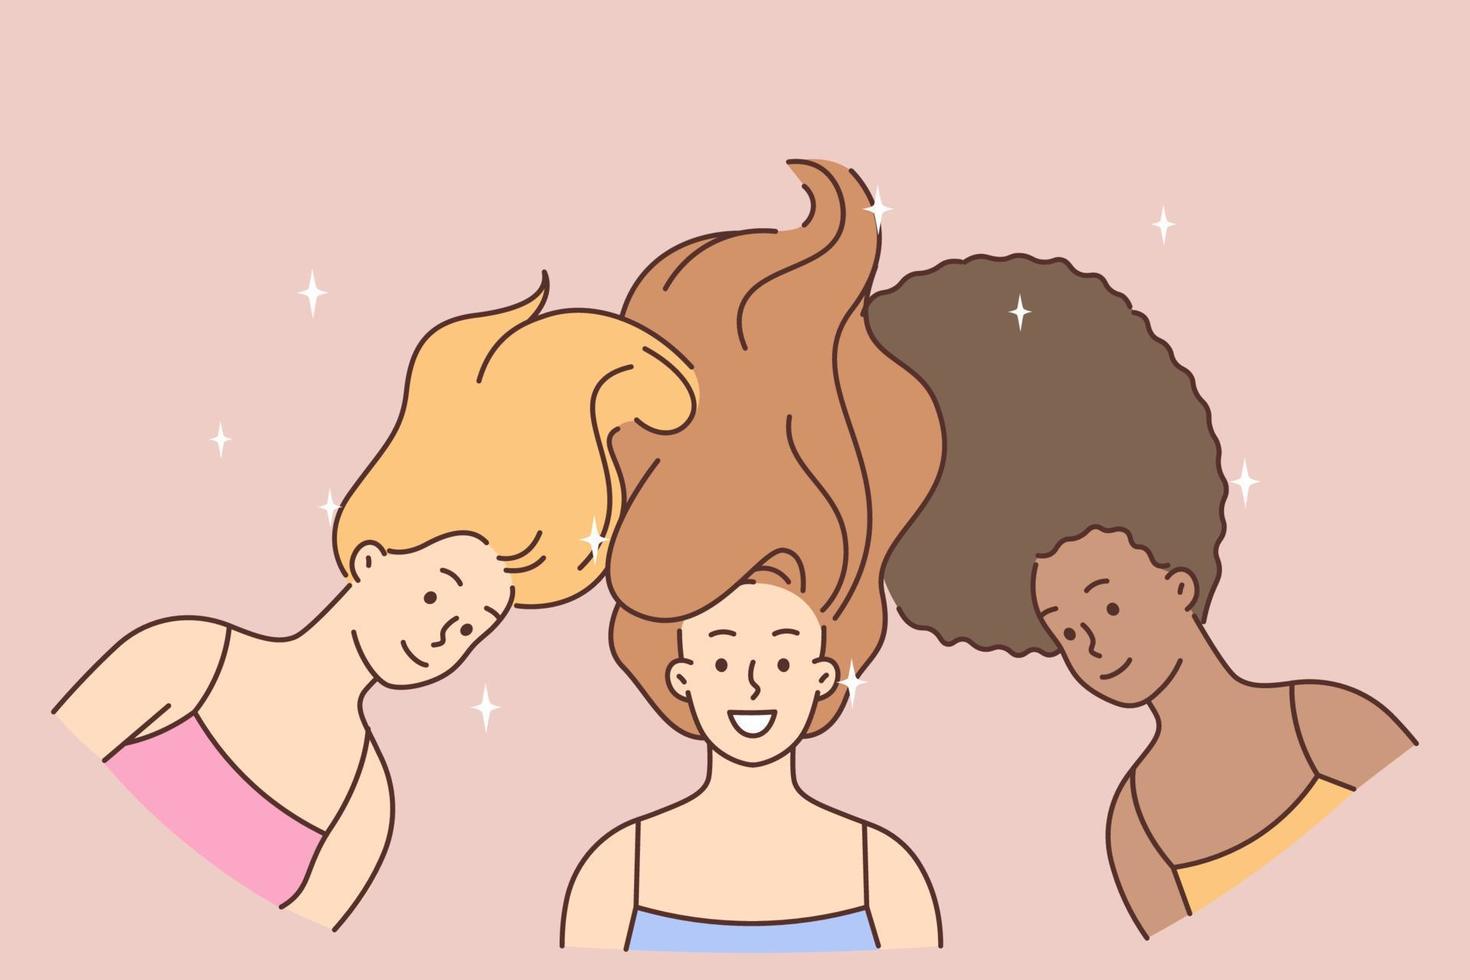 Smiling diverse women with long healthy hair promote concept of international beauty. Happy multiethnic interracial girls posing together. Vector illustration.